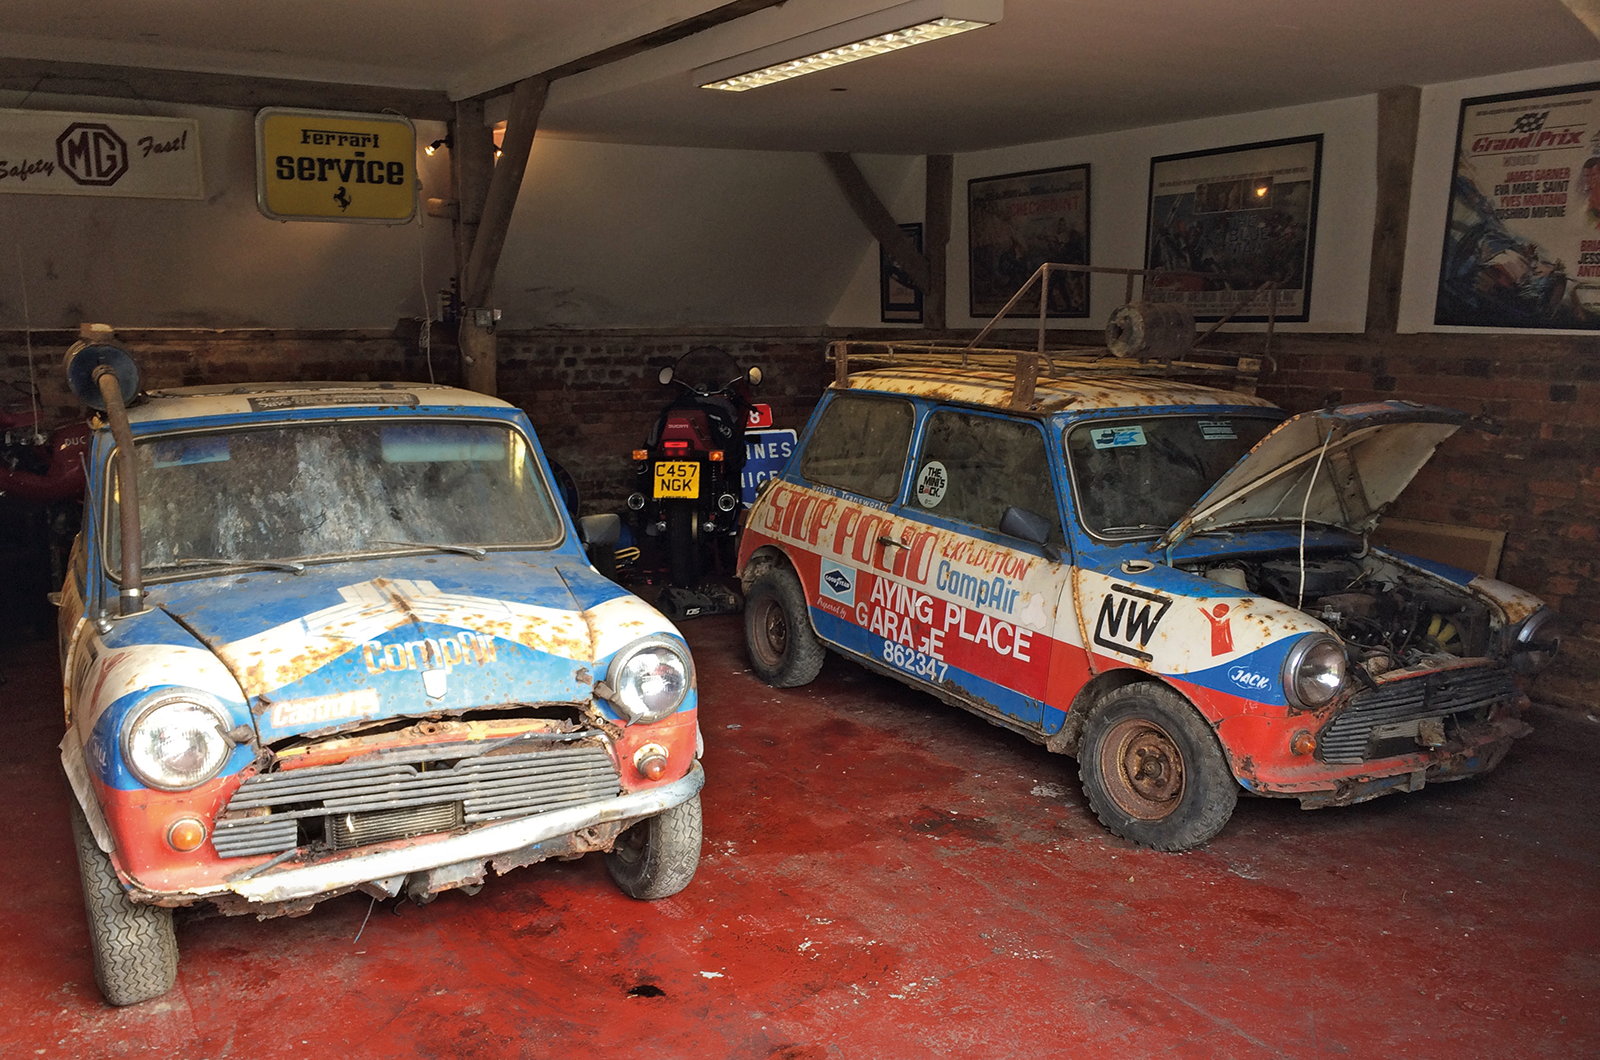 Classic & Sports Car – 60,000 miles around the world in Minis